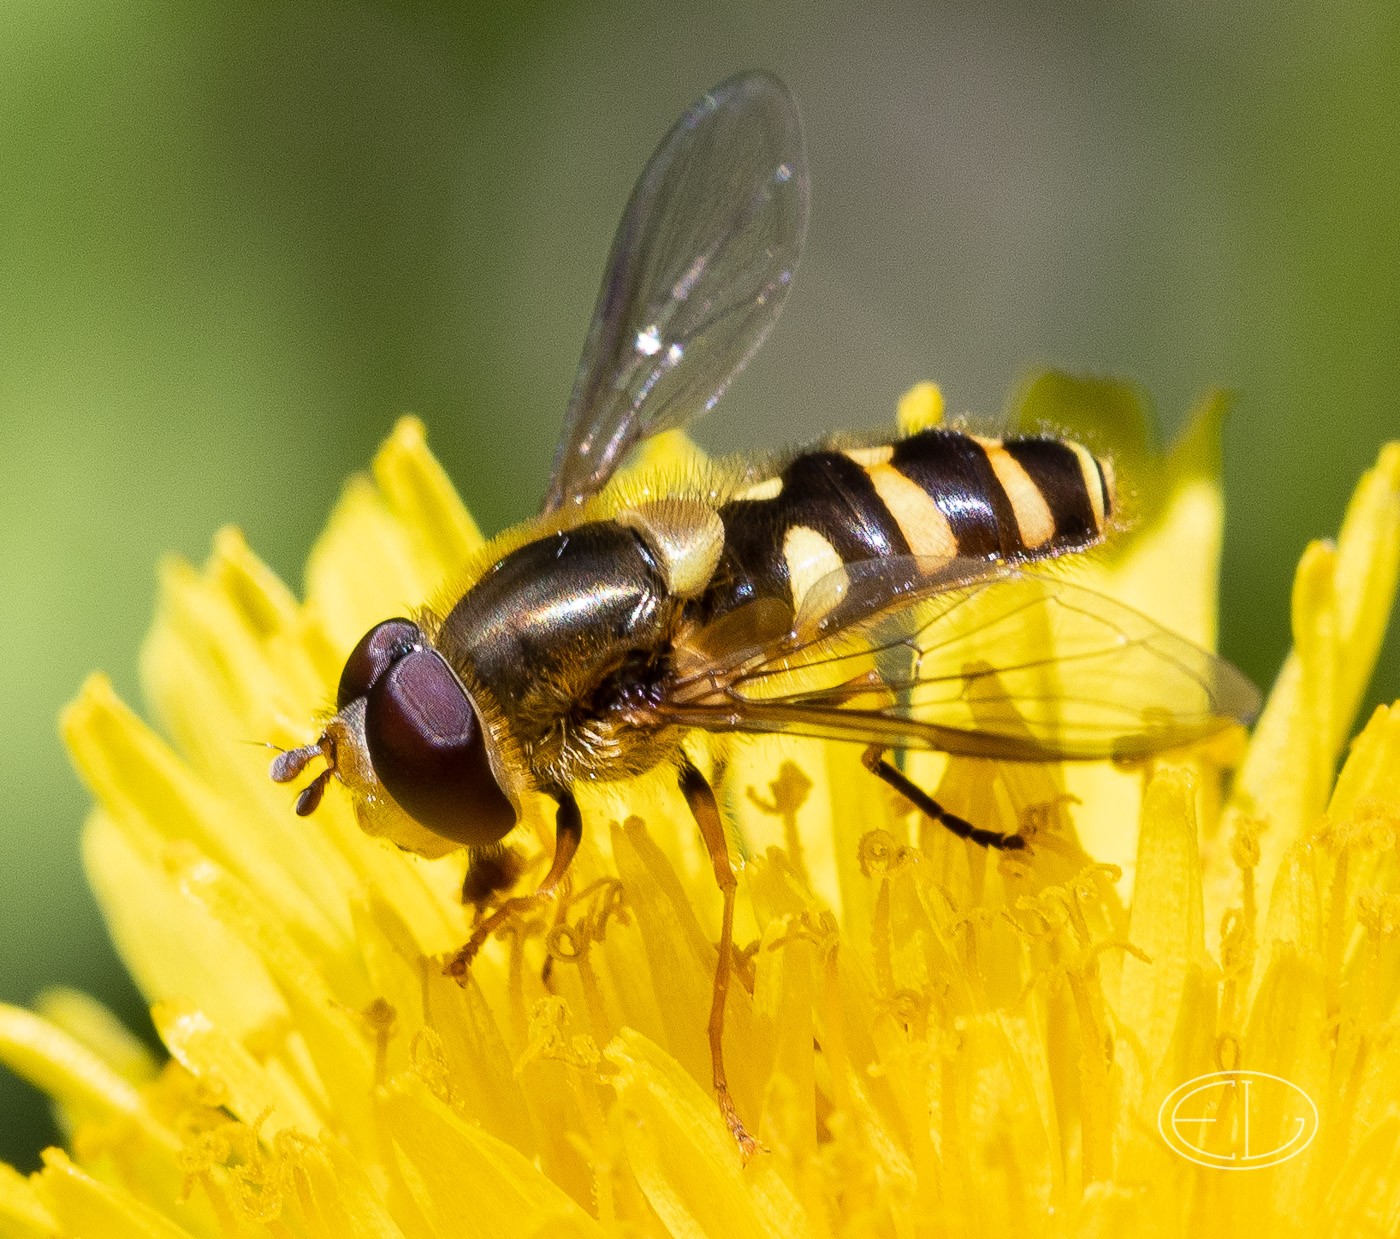 R5_A4935 Hoverfly.jpg